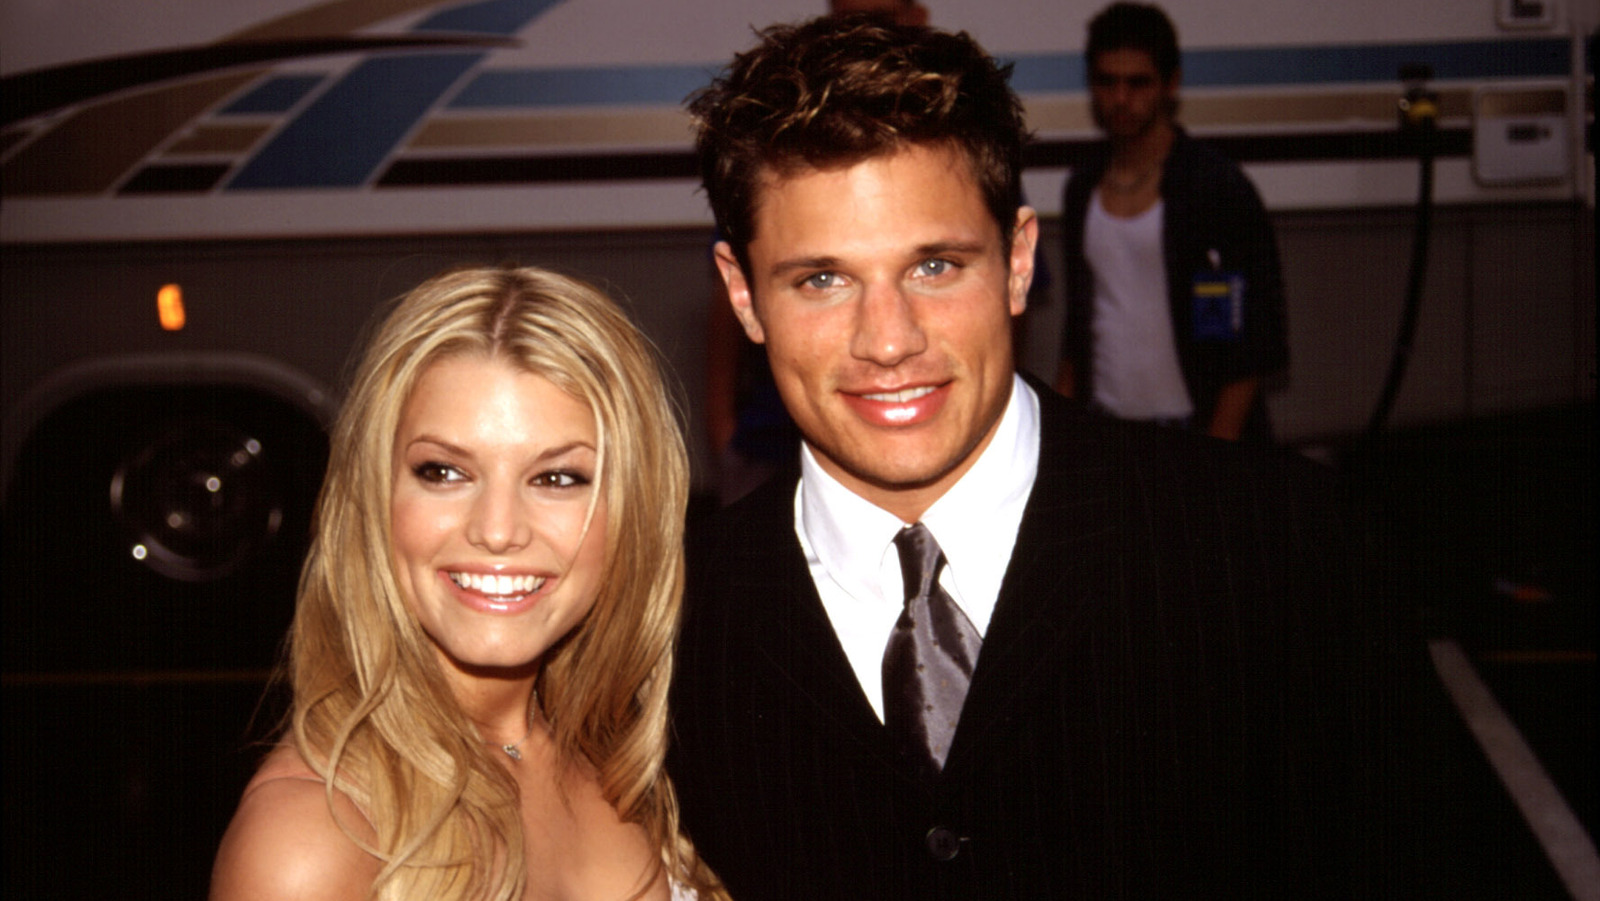 When was Jessica Simpson married to Nick Lachey?